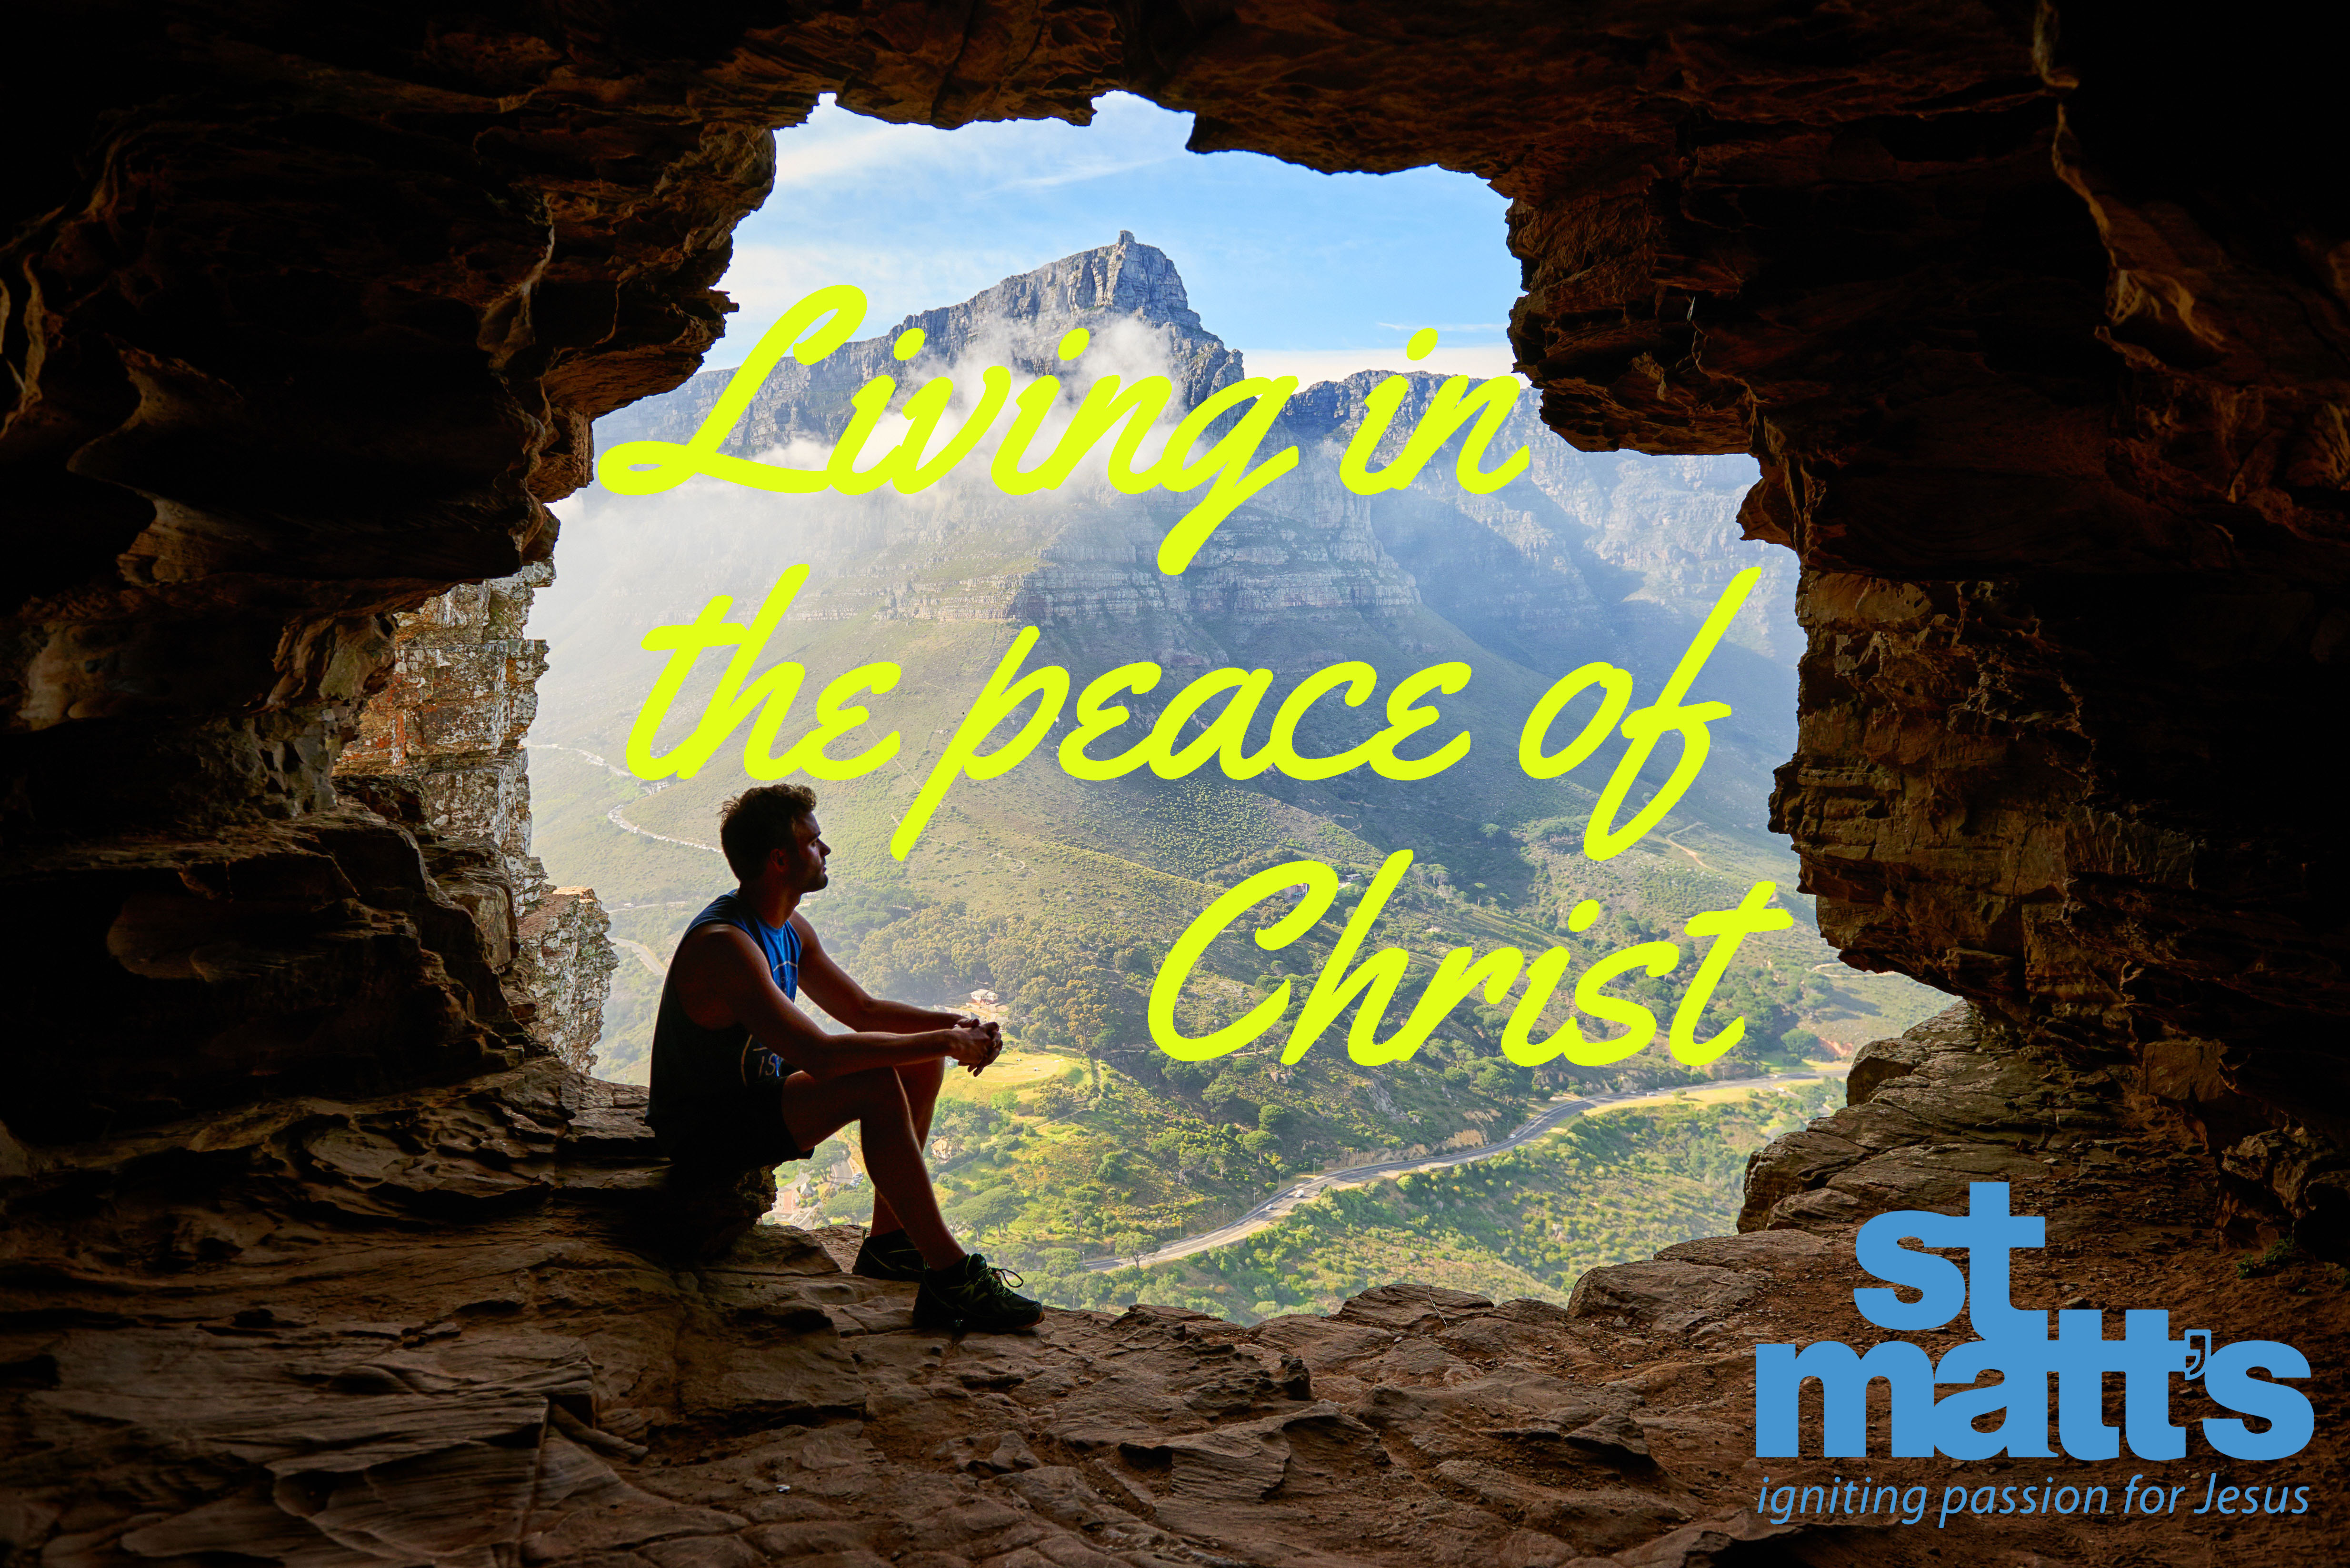 [Living in the peace of Christ] Hope For The Future